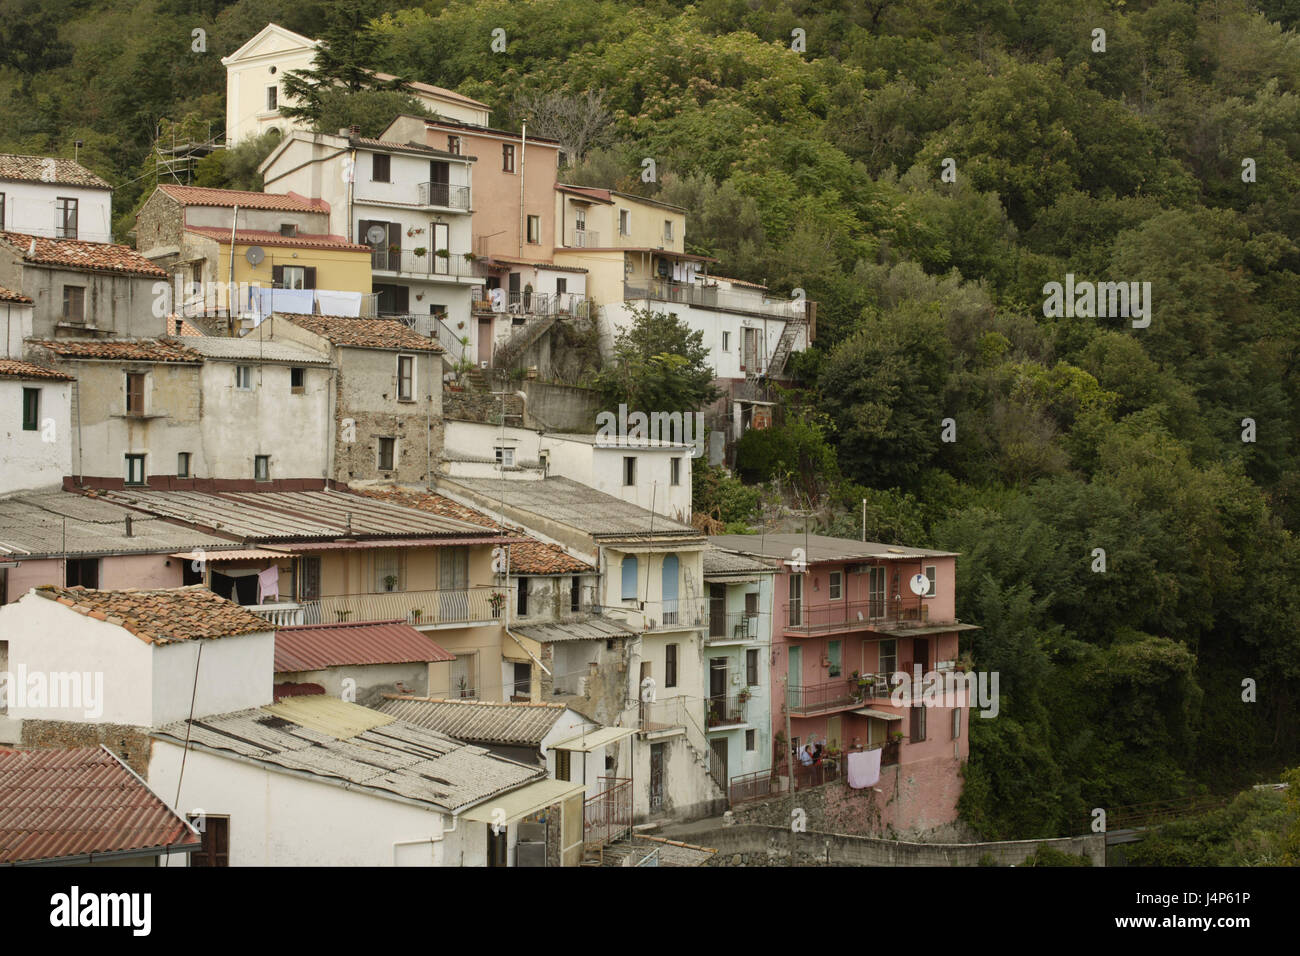 Italy, Calabria, Nicastro, Süditalien, town, houses, residential houses, facades, of different colour, neglectedly, old, hillside situation, Stock Photo